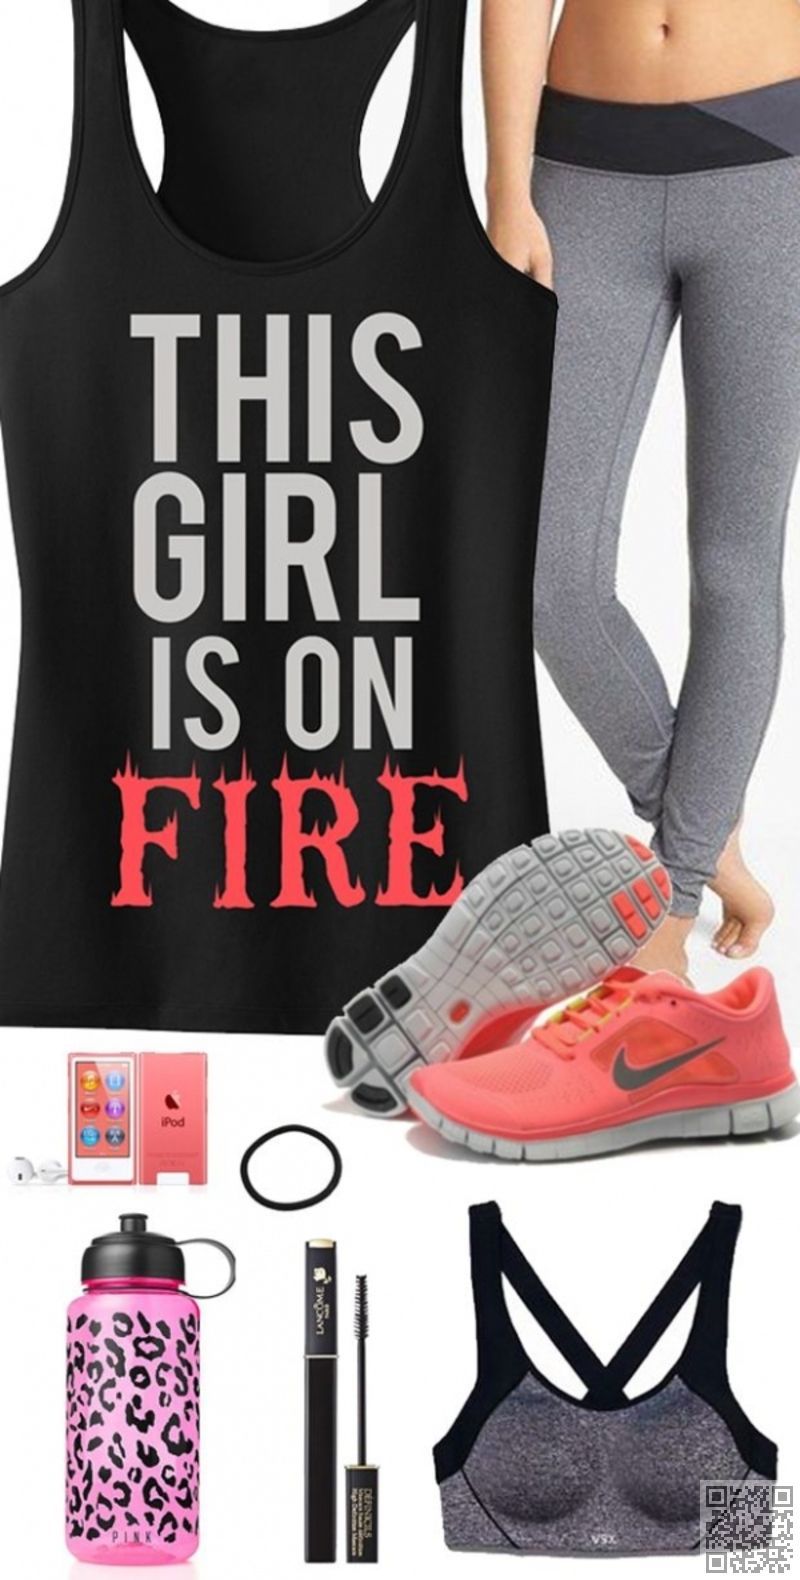 6. THIS GIRL is on FIRE - Don't Know What to Wear for Your #Workout? 25 Amazing… -   16 fitness fashion workout
 ideas